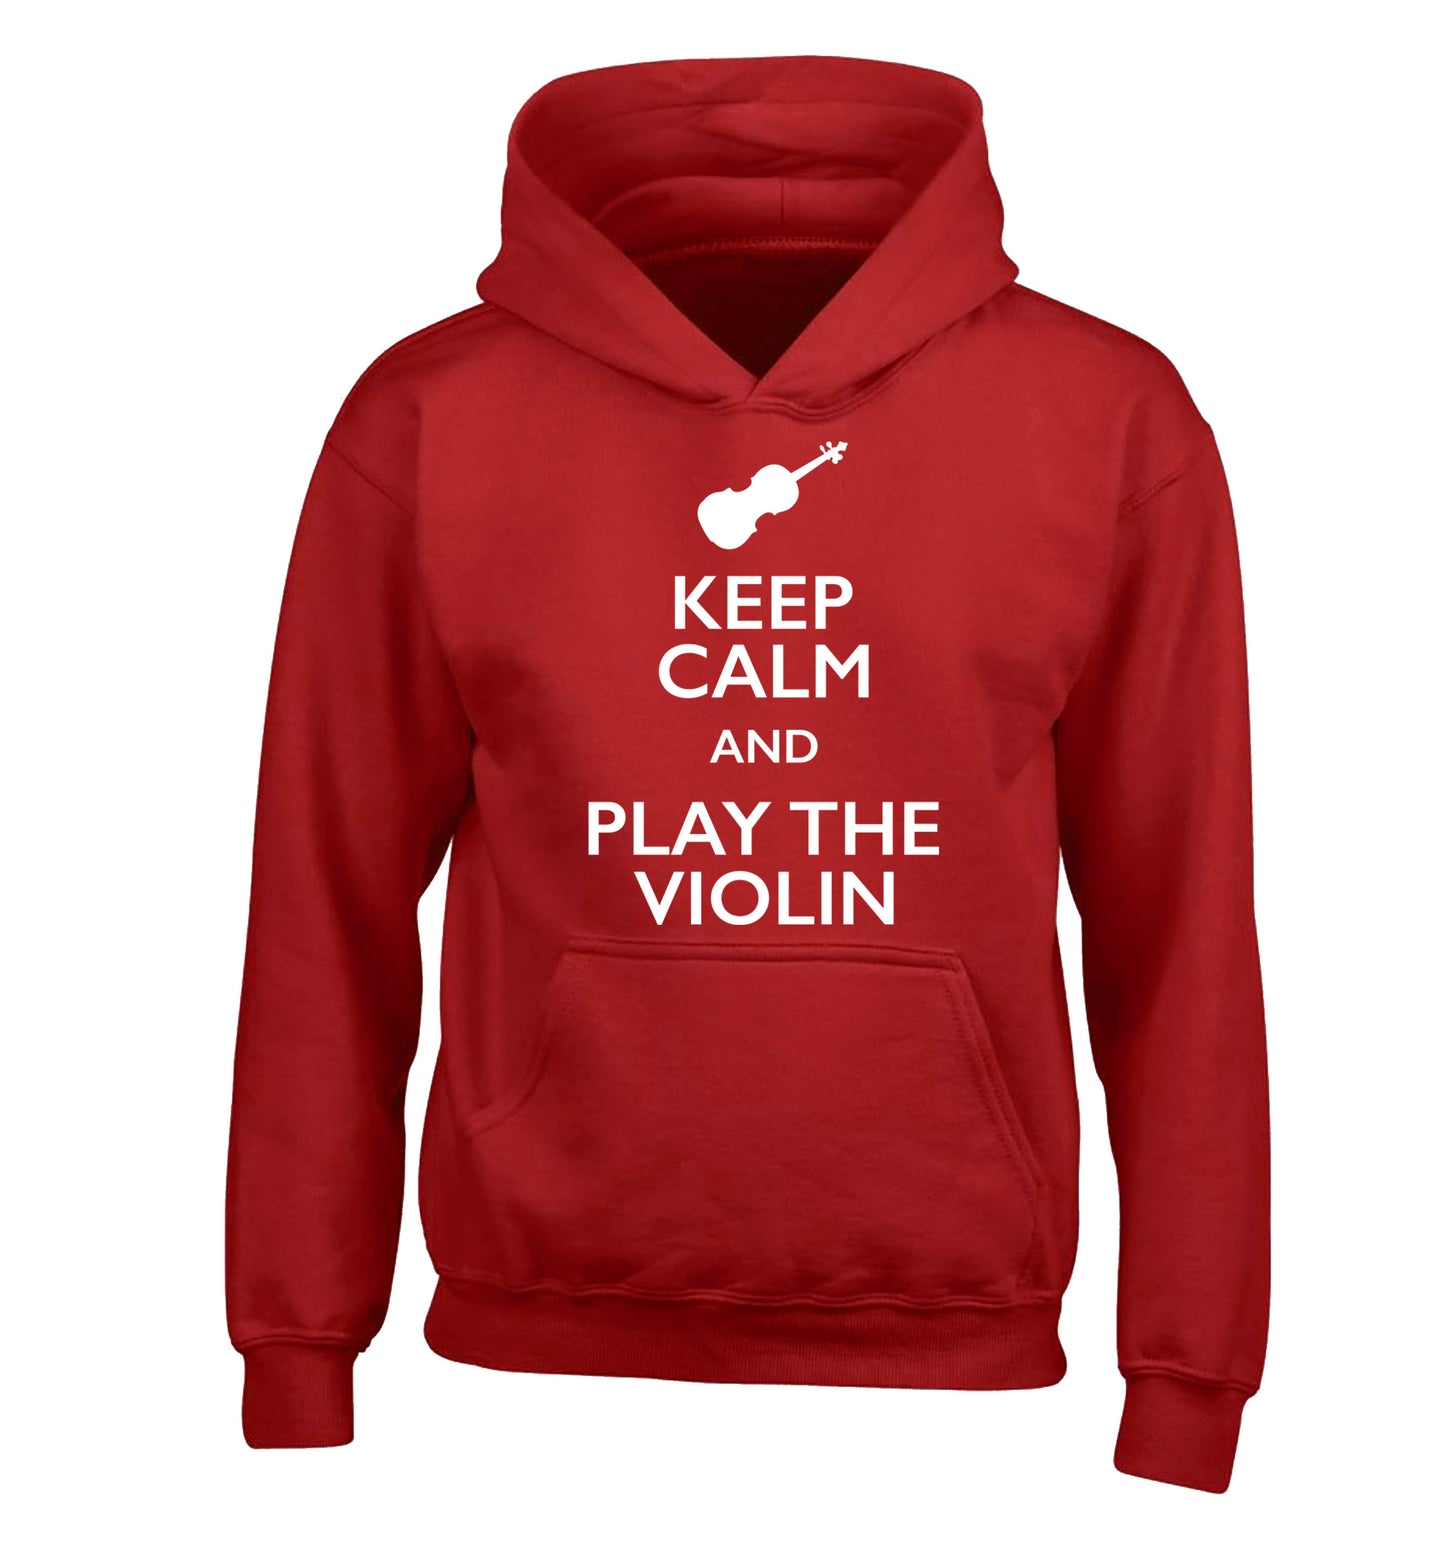 Keep calm and play the violin children's red hoodie 12-13 Years